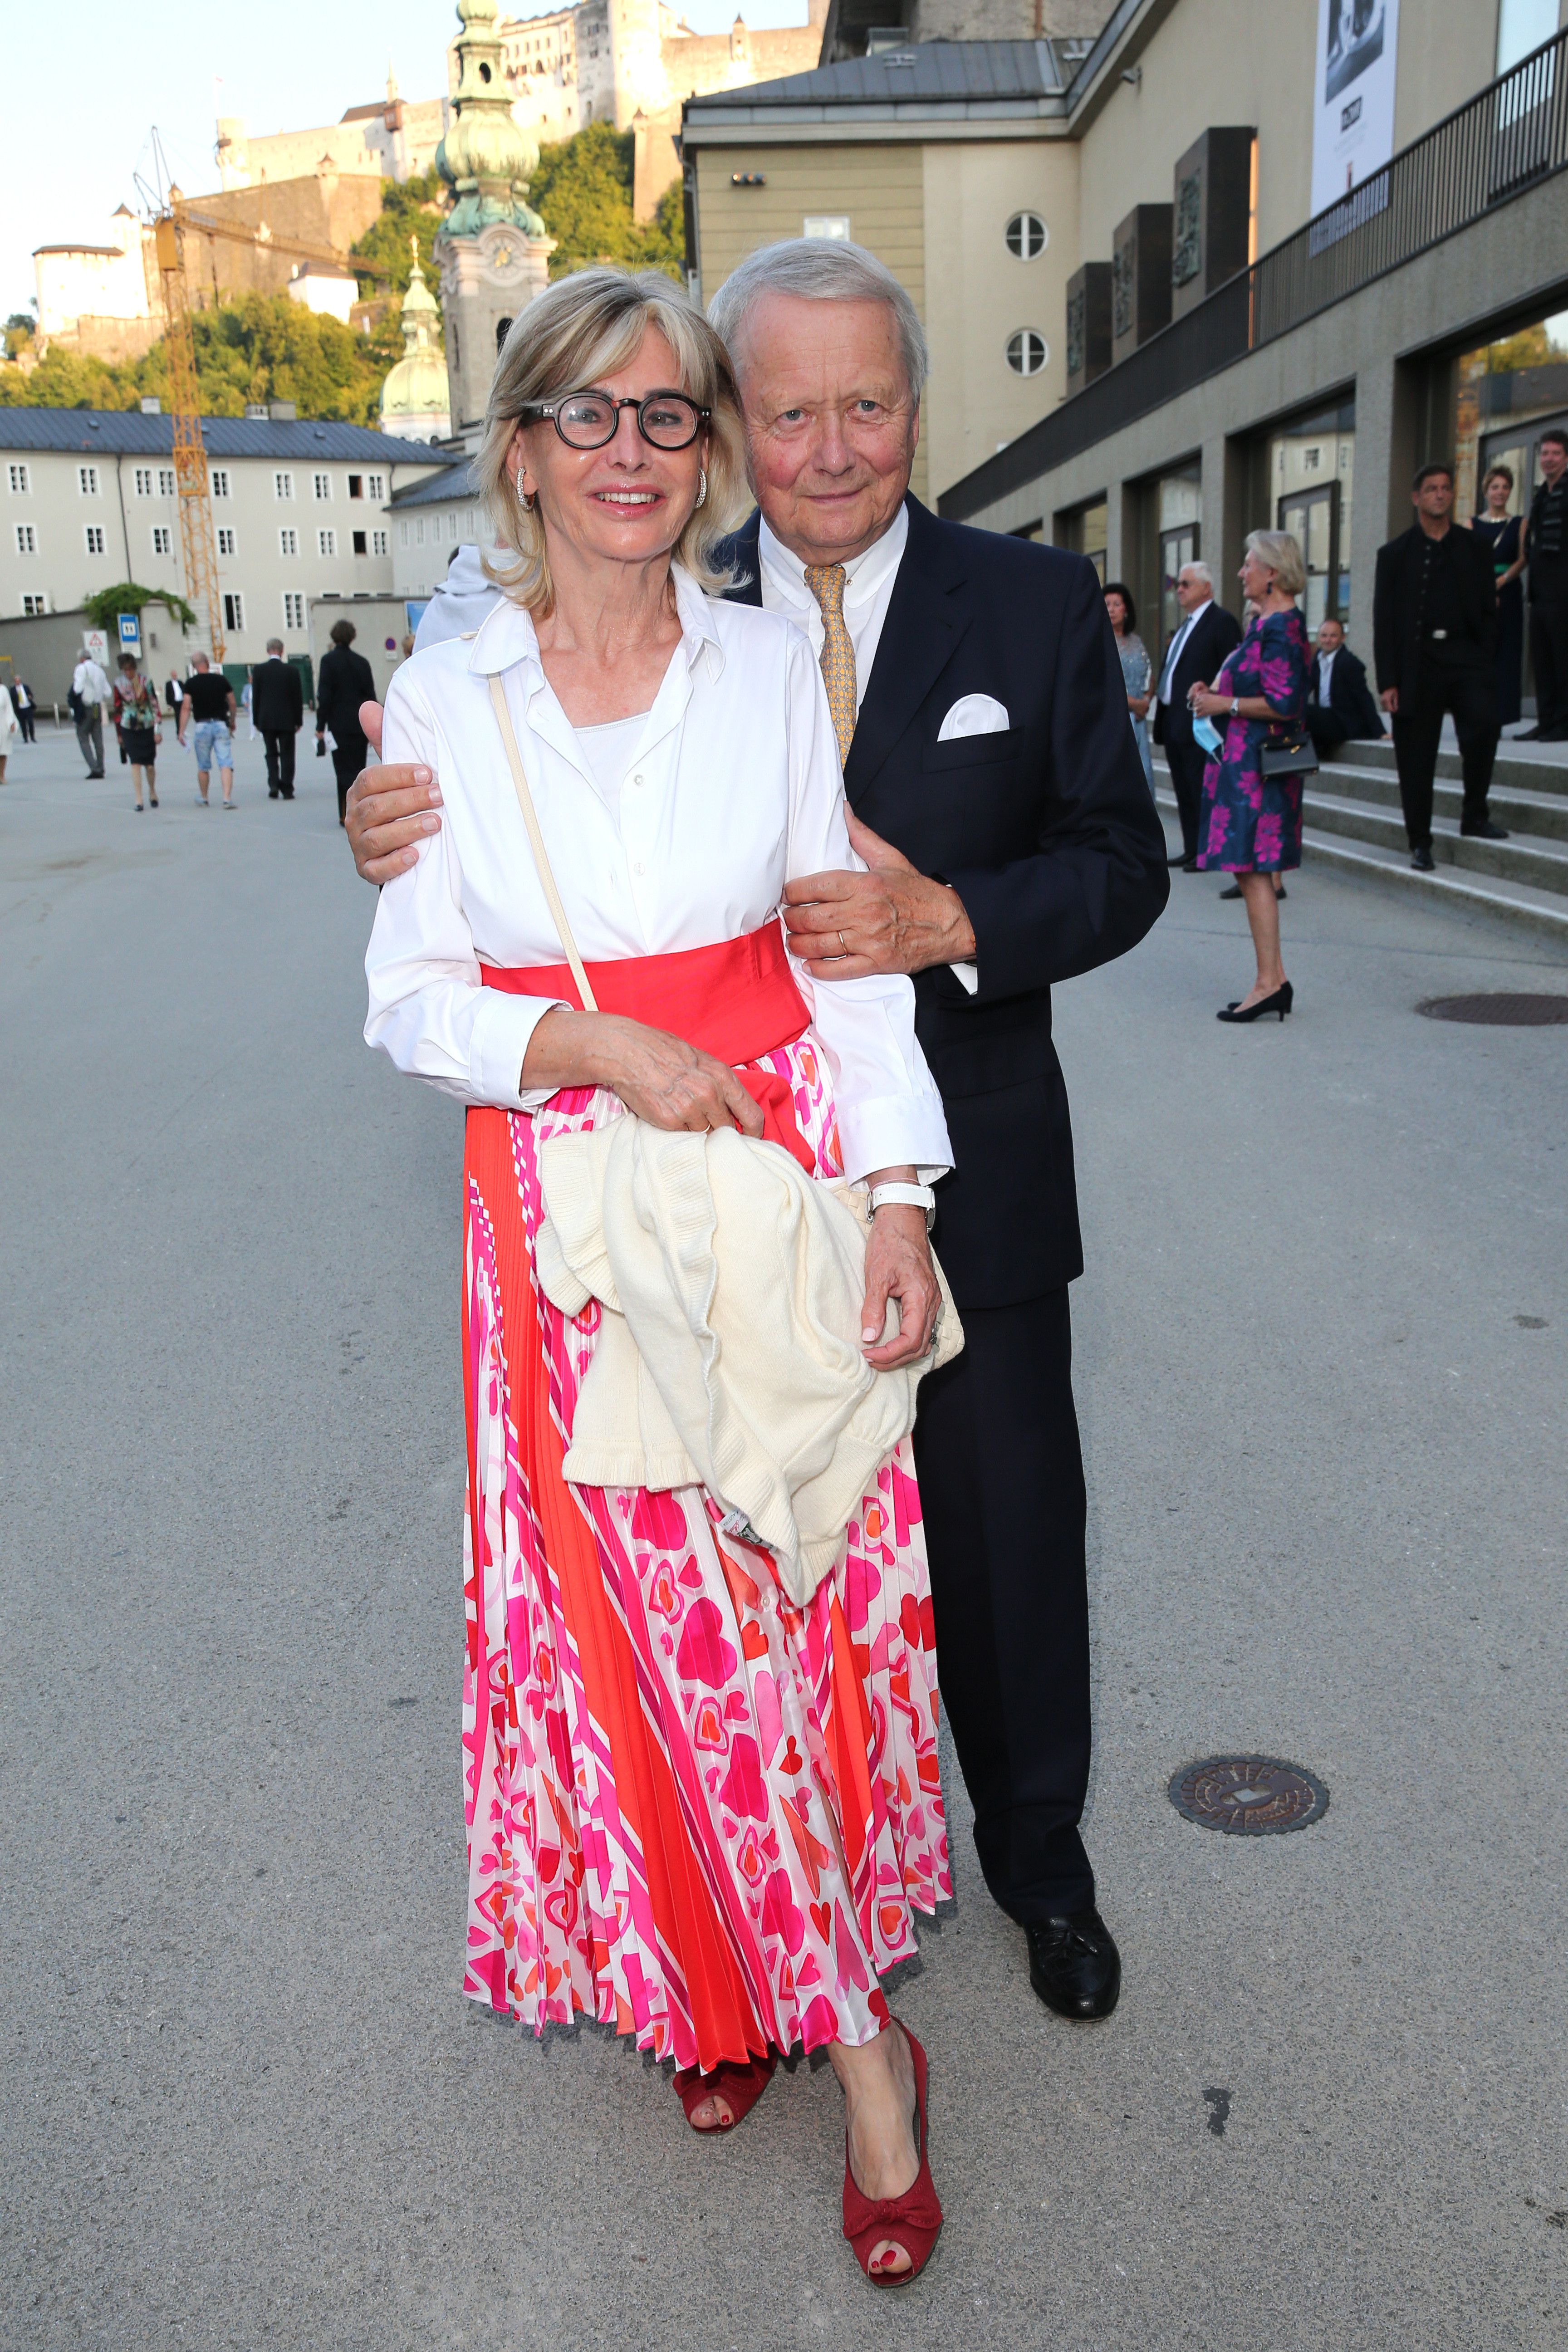 Claudia Porsche and Wolfgang Porsche attend the Salzburg Festival at Salzburg State Theatre on August 6, 2020. | Source: Getty Images